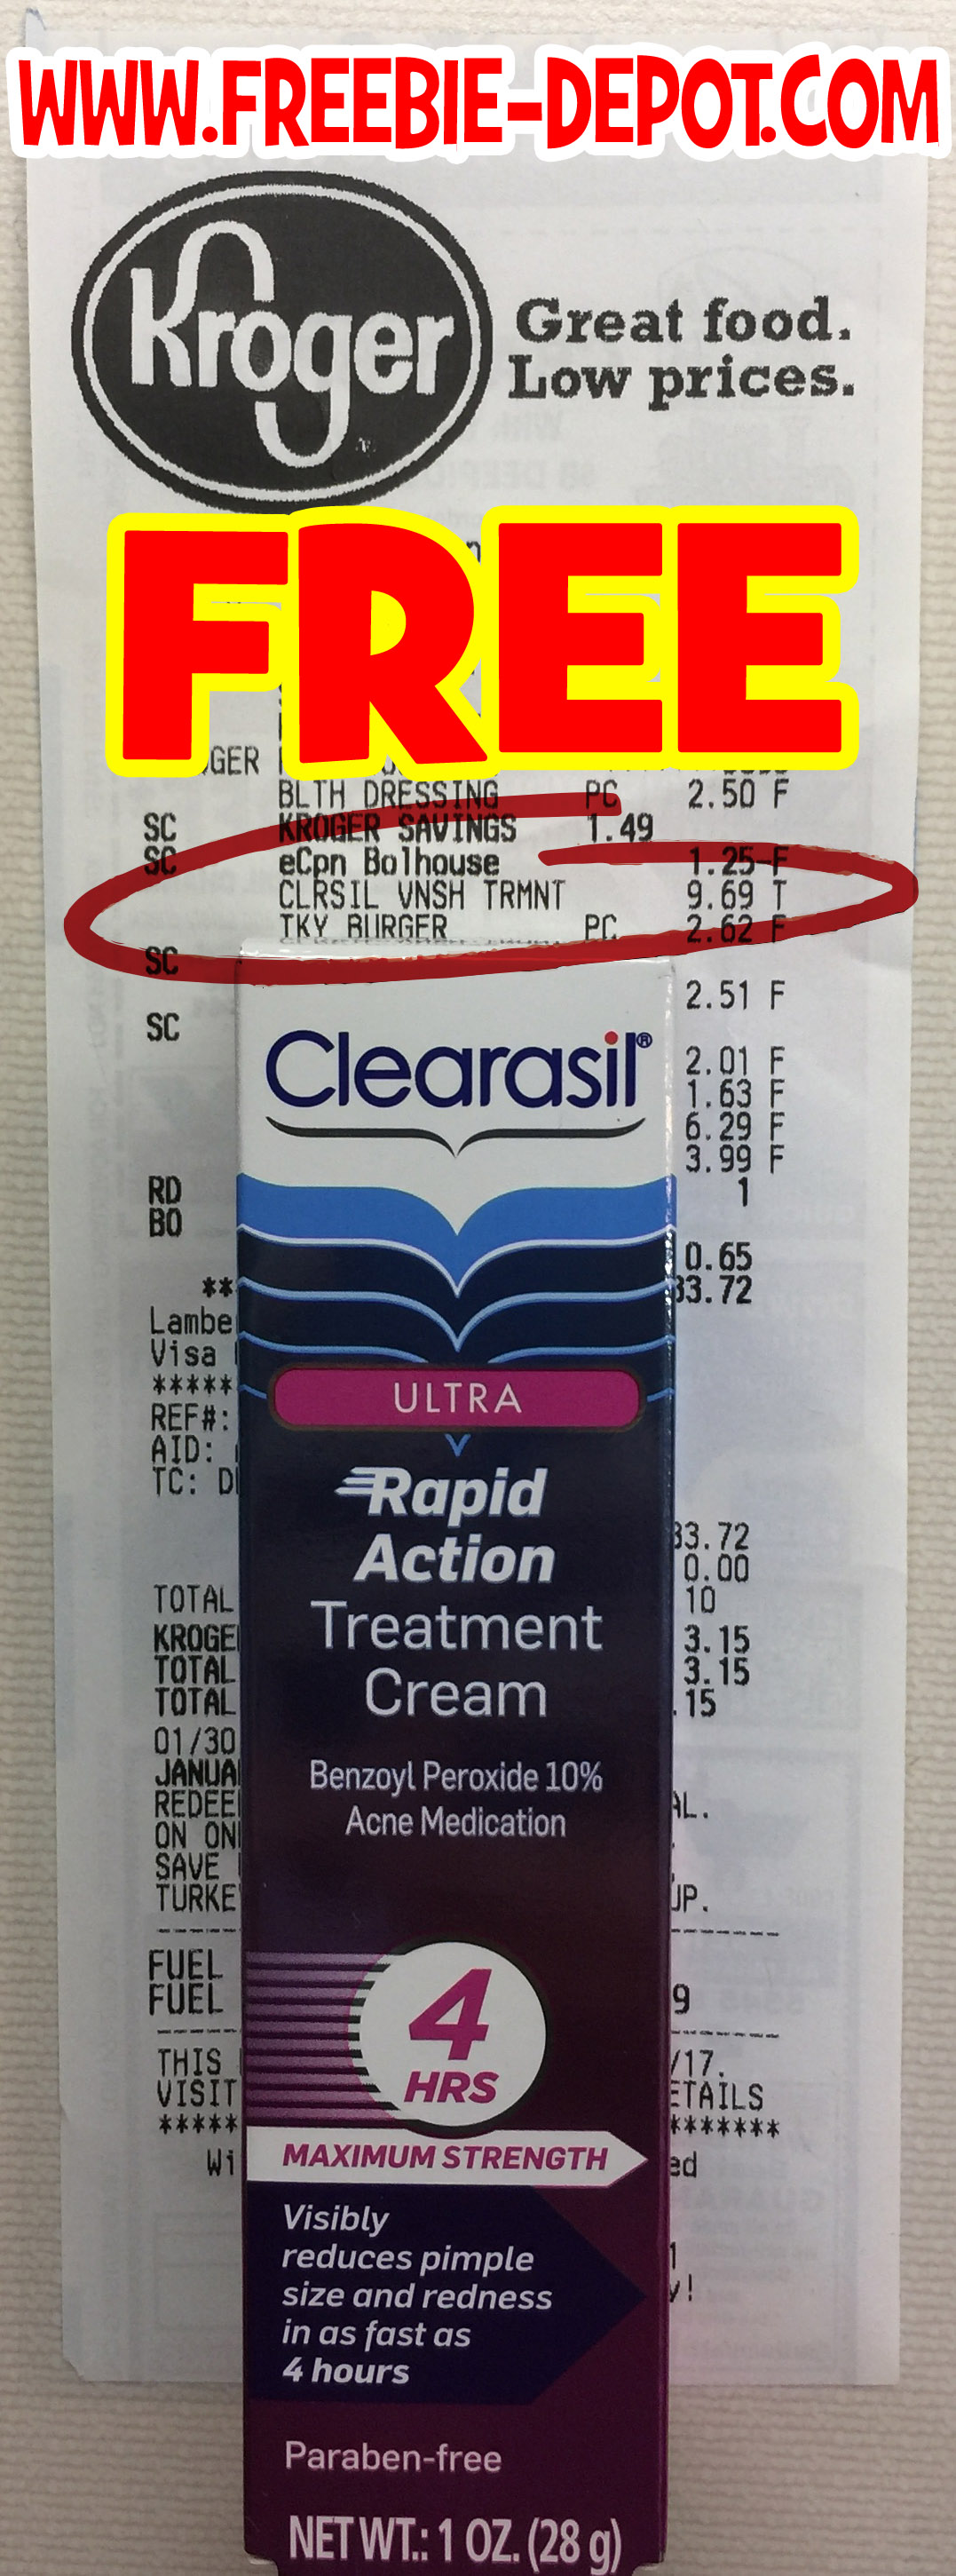 FREE AFTER REBATE – ANY Clearasil Product – Exp 1/31/17